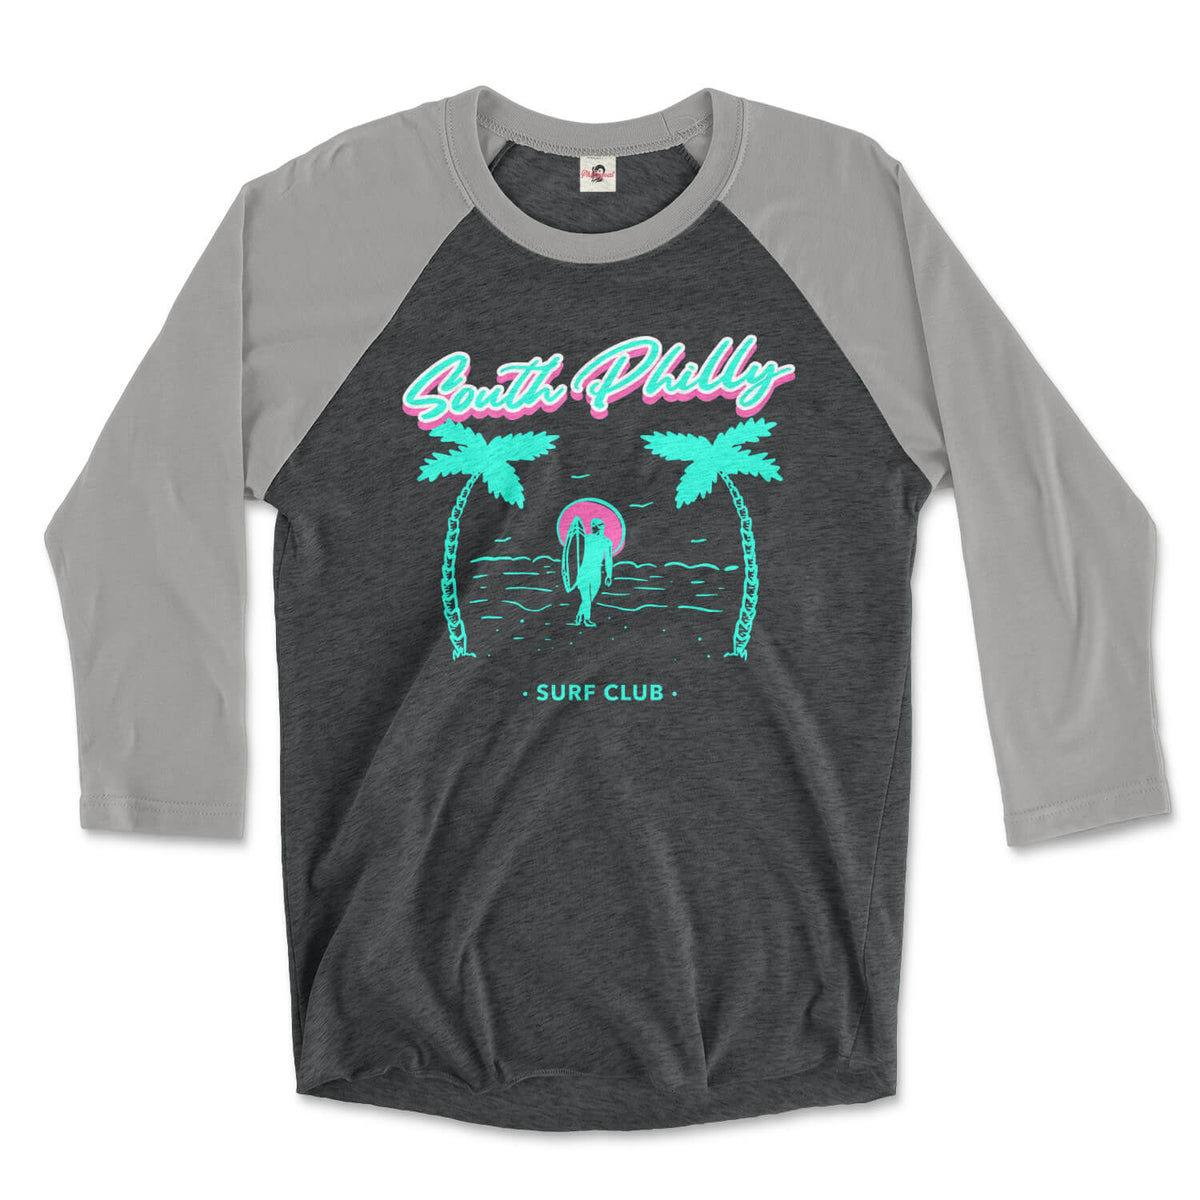 south philadelphia surf philly with design of two palm trees and surfer on beach on a premium heather grey and vintage black 3/4 long sleeve raglan tee from phillygoat 